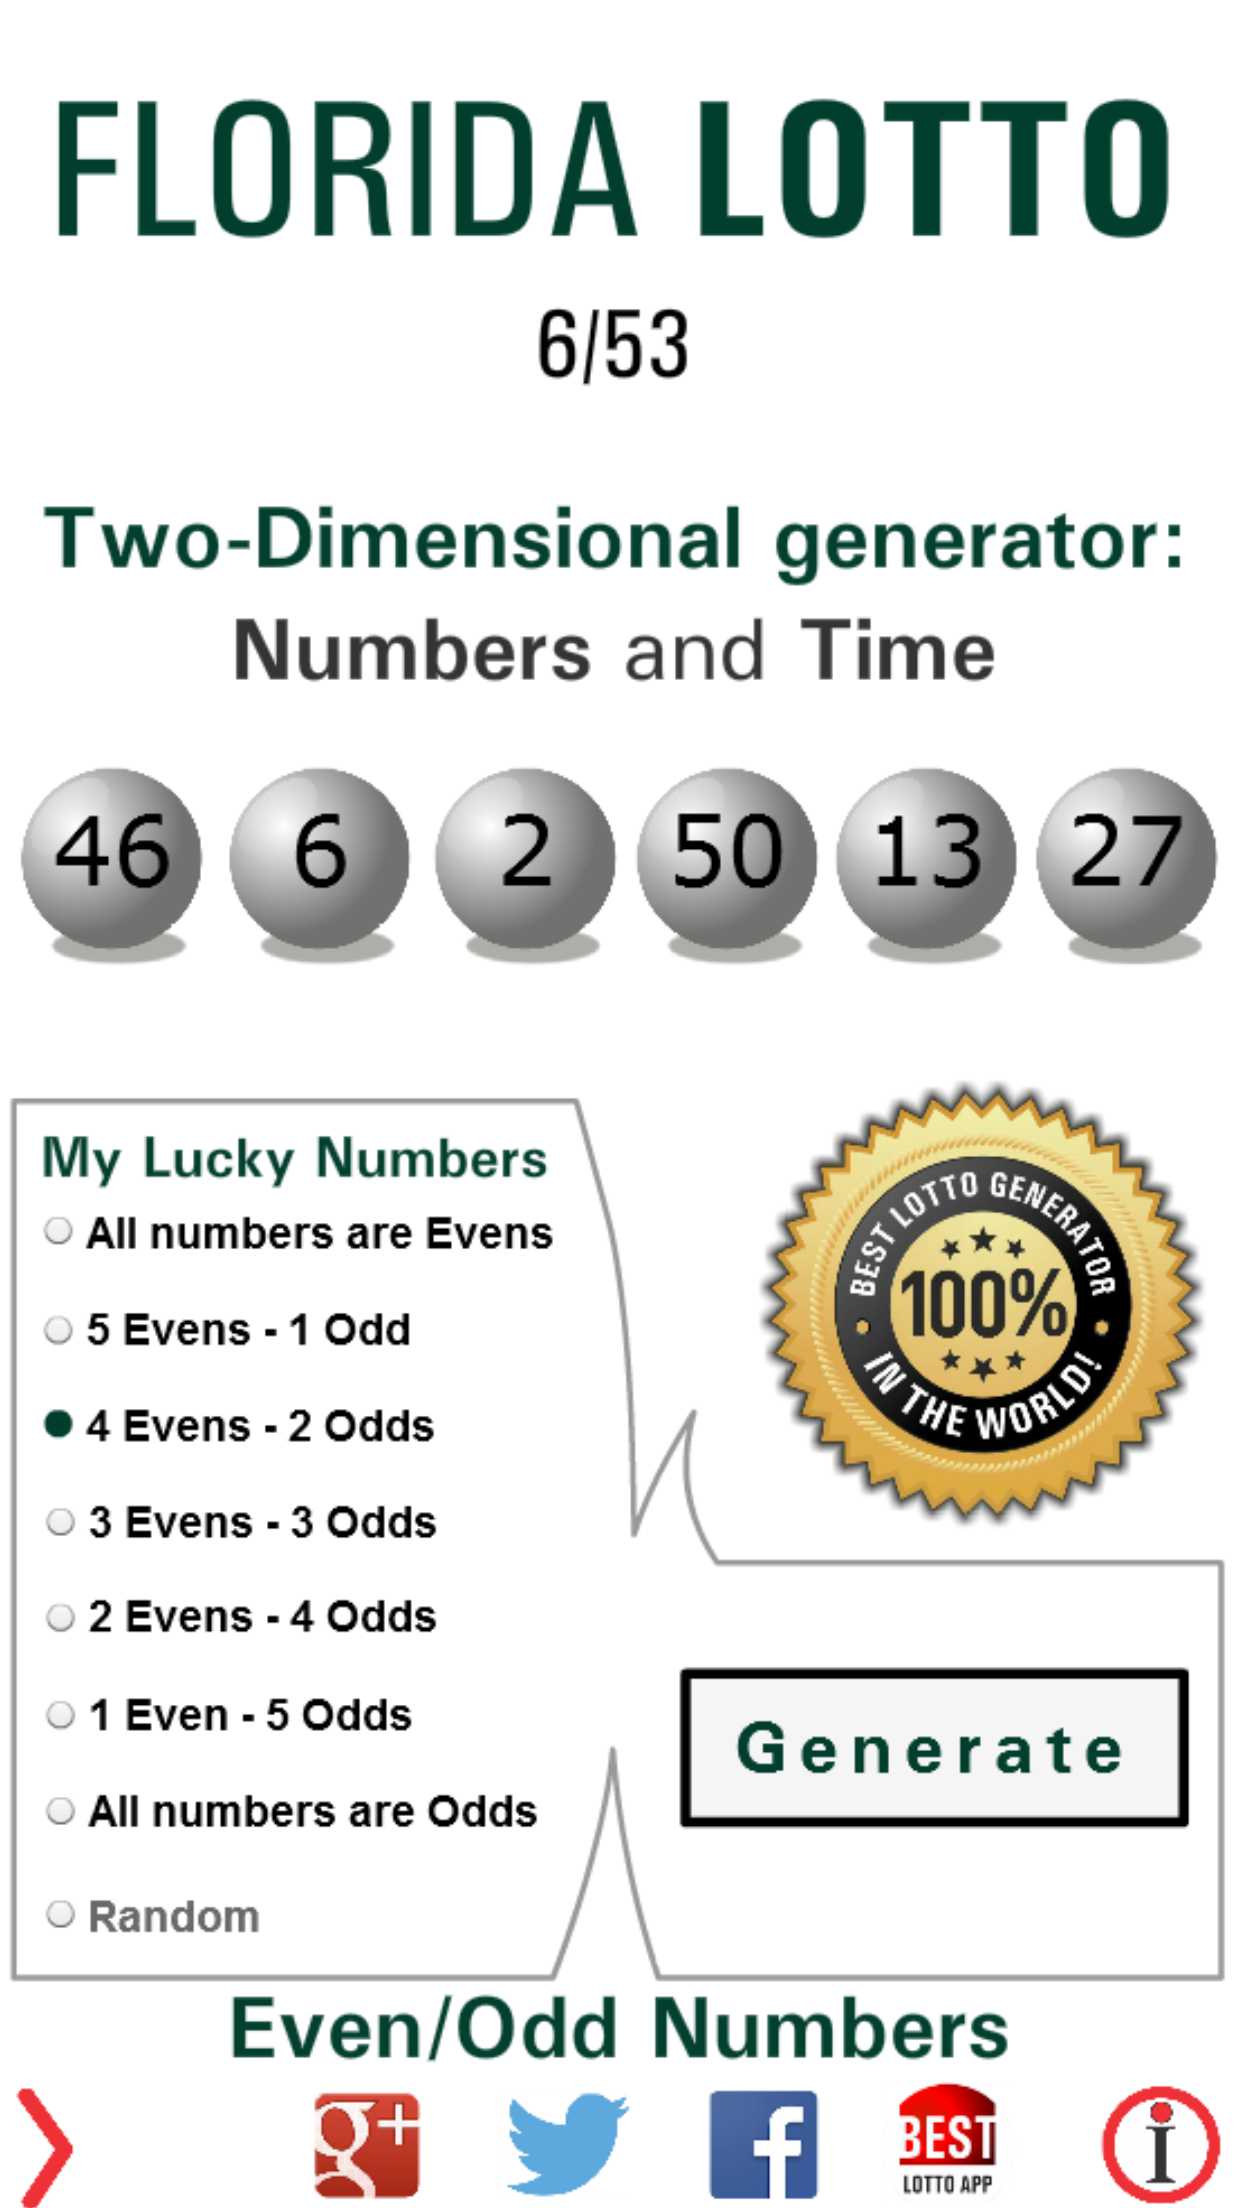 Florida Lottery (FL) - Lotto Results, Tips & Winning Numbers